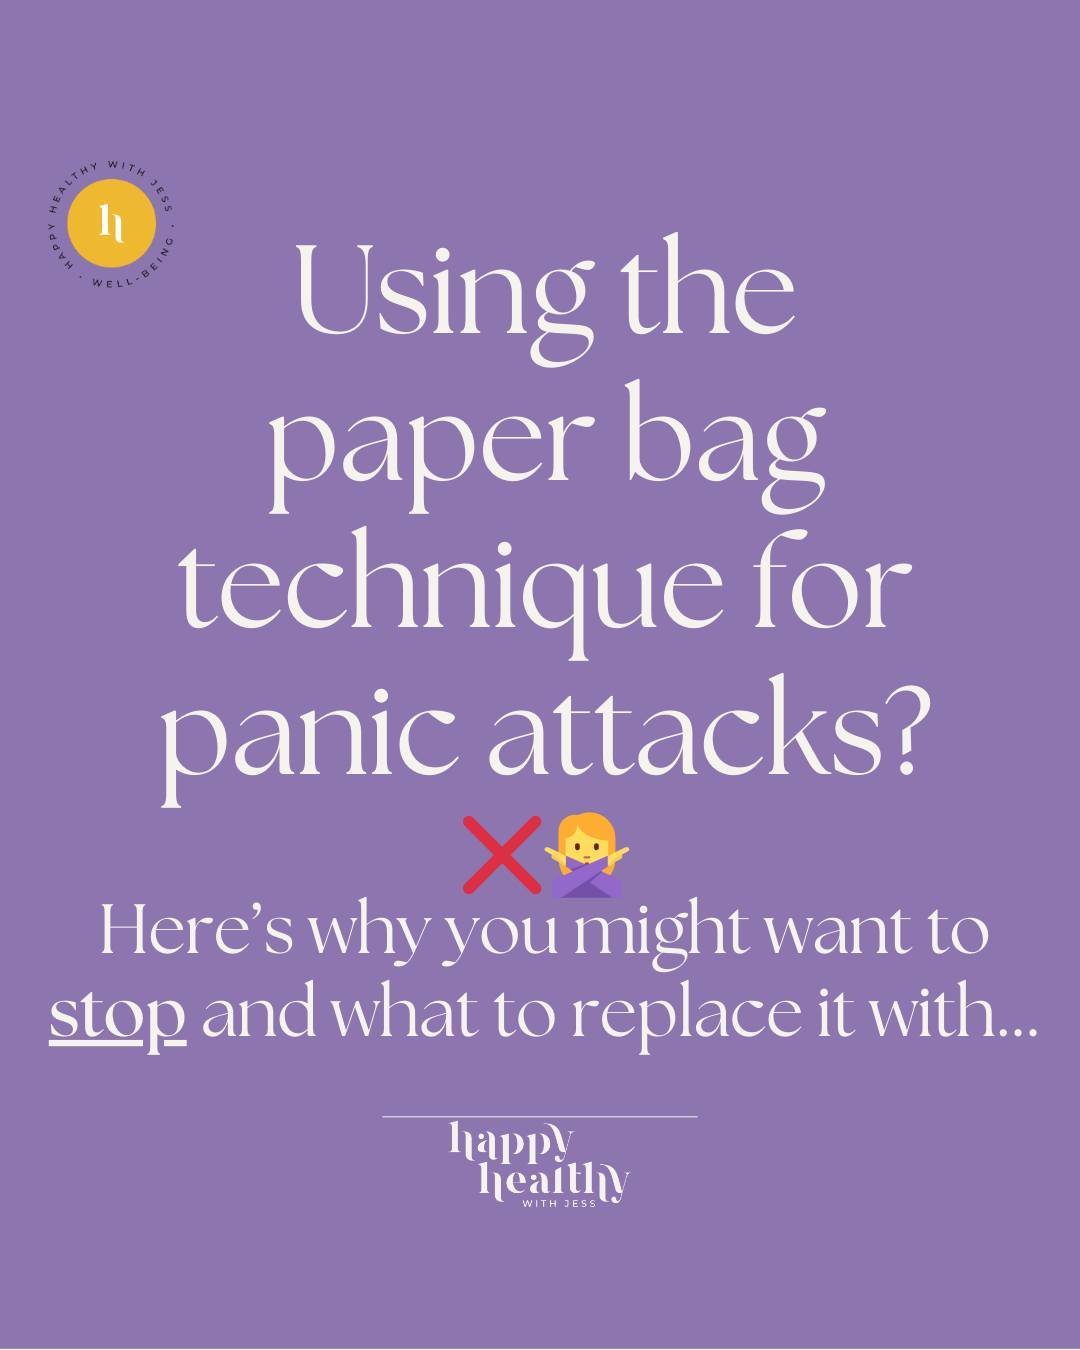 Struggling with panic attacks? Let's talk solutions 🌿⁠
⁠
Swipe through this carousel to uncover a safer alternative to the paper bag method during a panic attack. You might be familiar with the concept of hyperventilating&mdash;breathing hard and fa